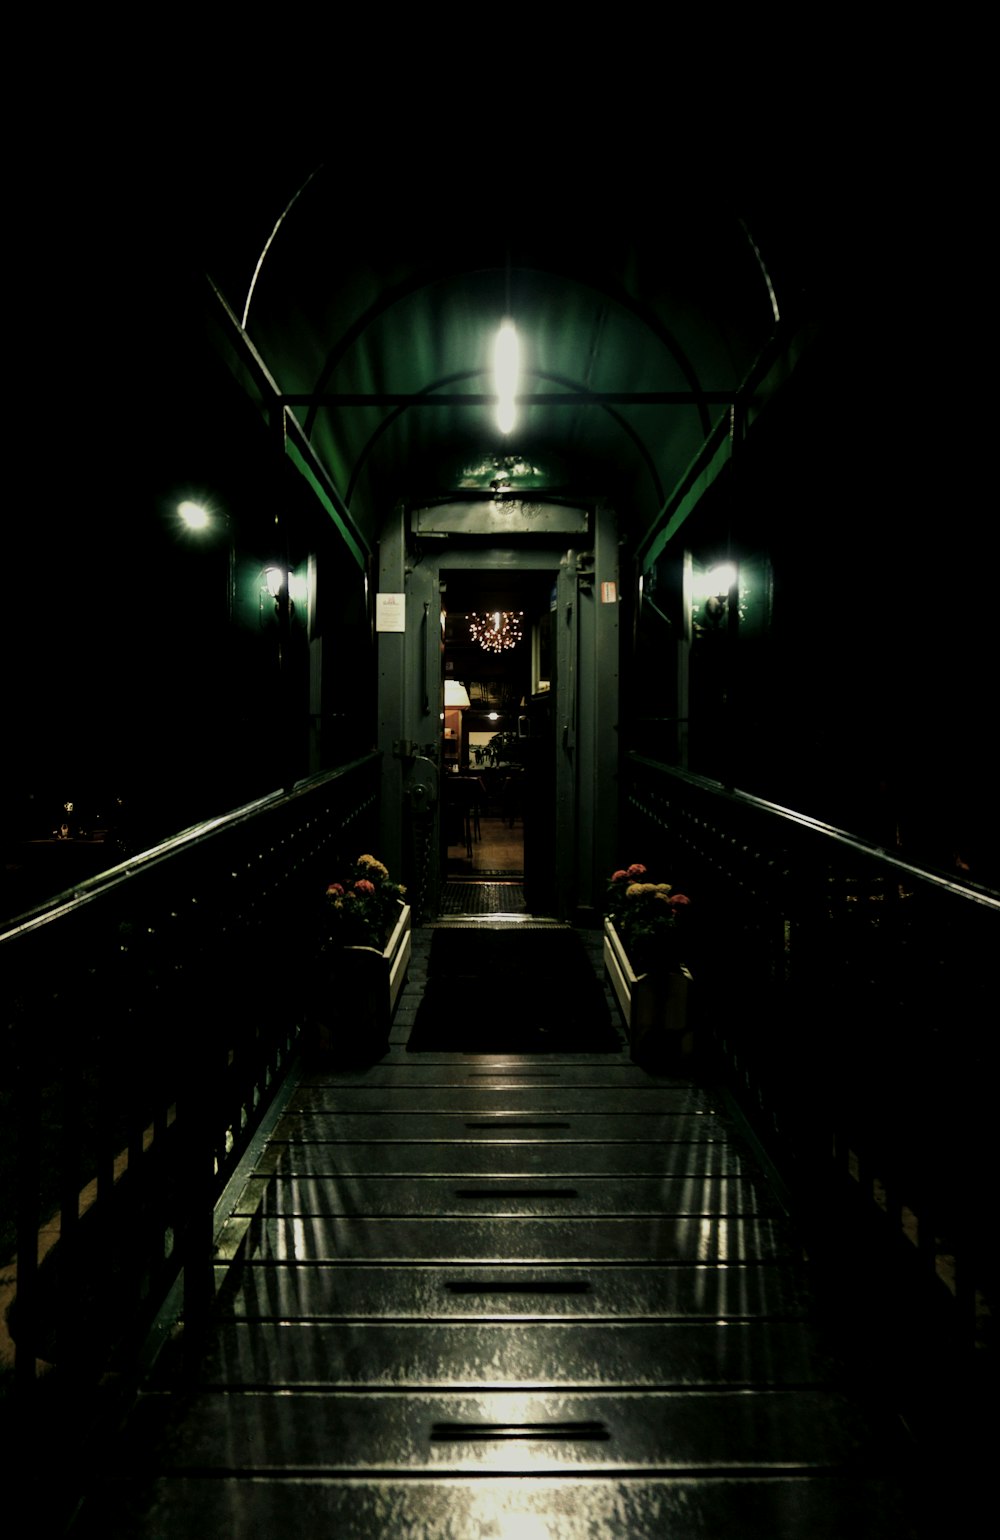 a long dark hallway with a green light at the end